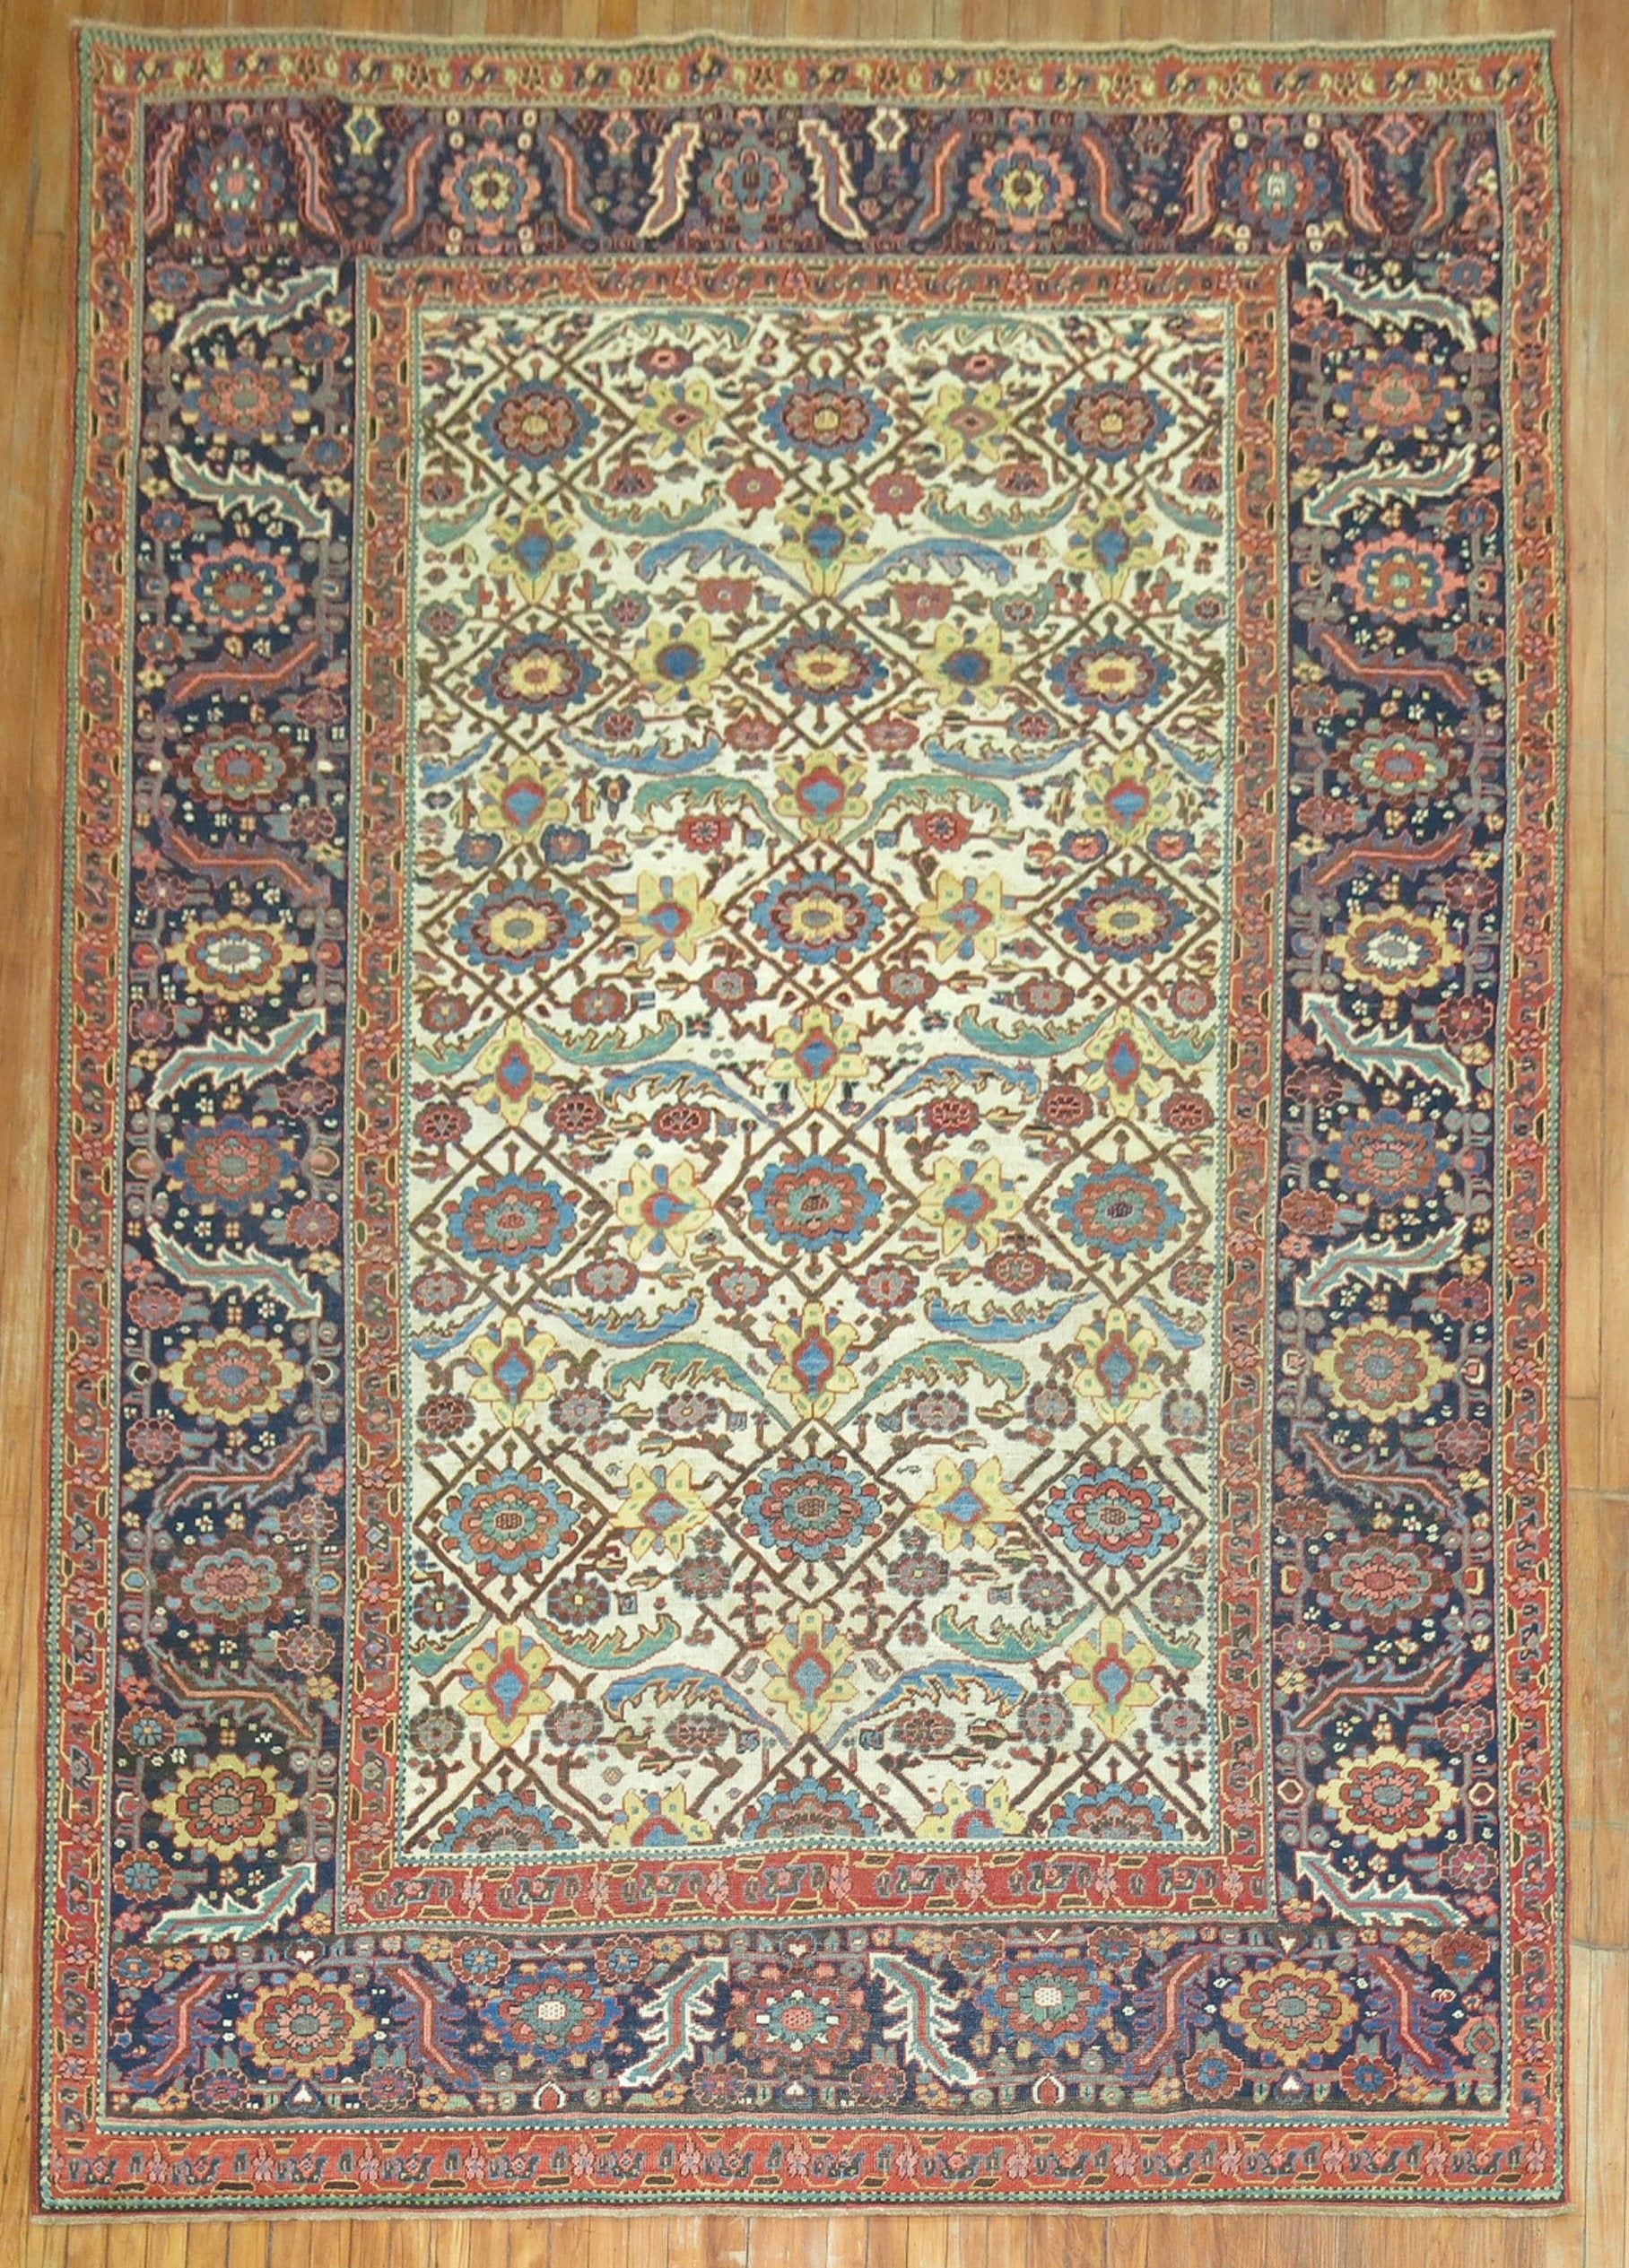 A very fine early 20th century Ivory ground Northwest Persia Rug small room size Rug

Size 7' 6